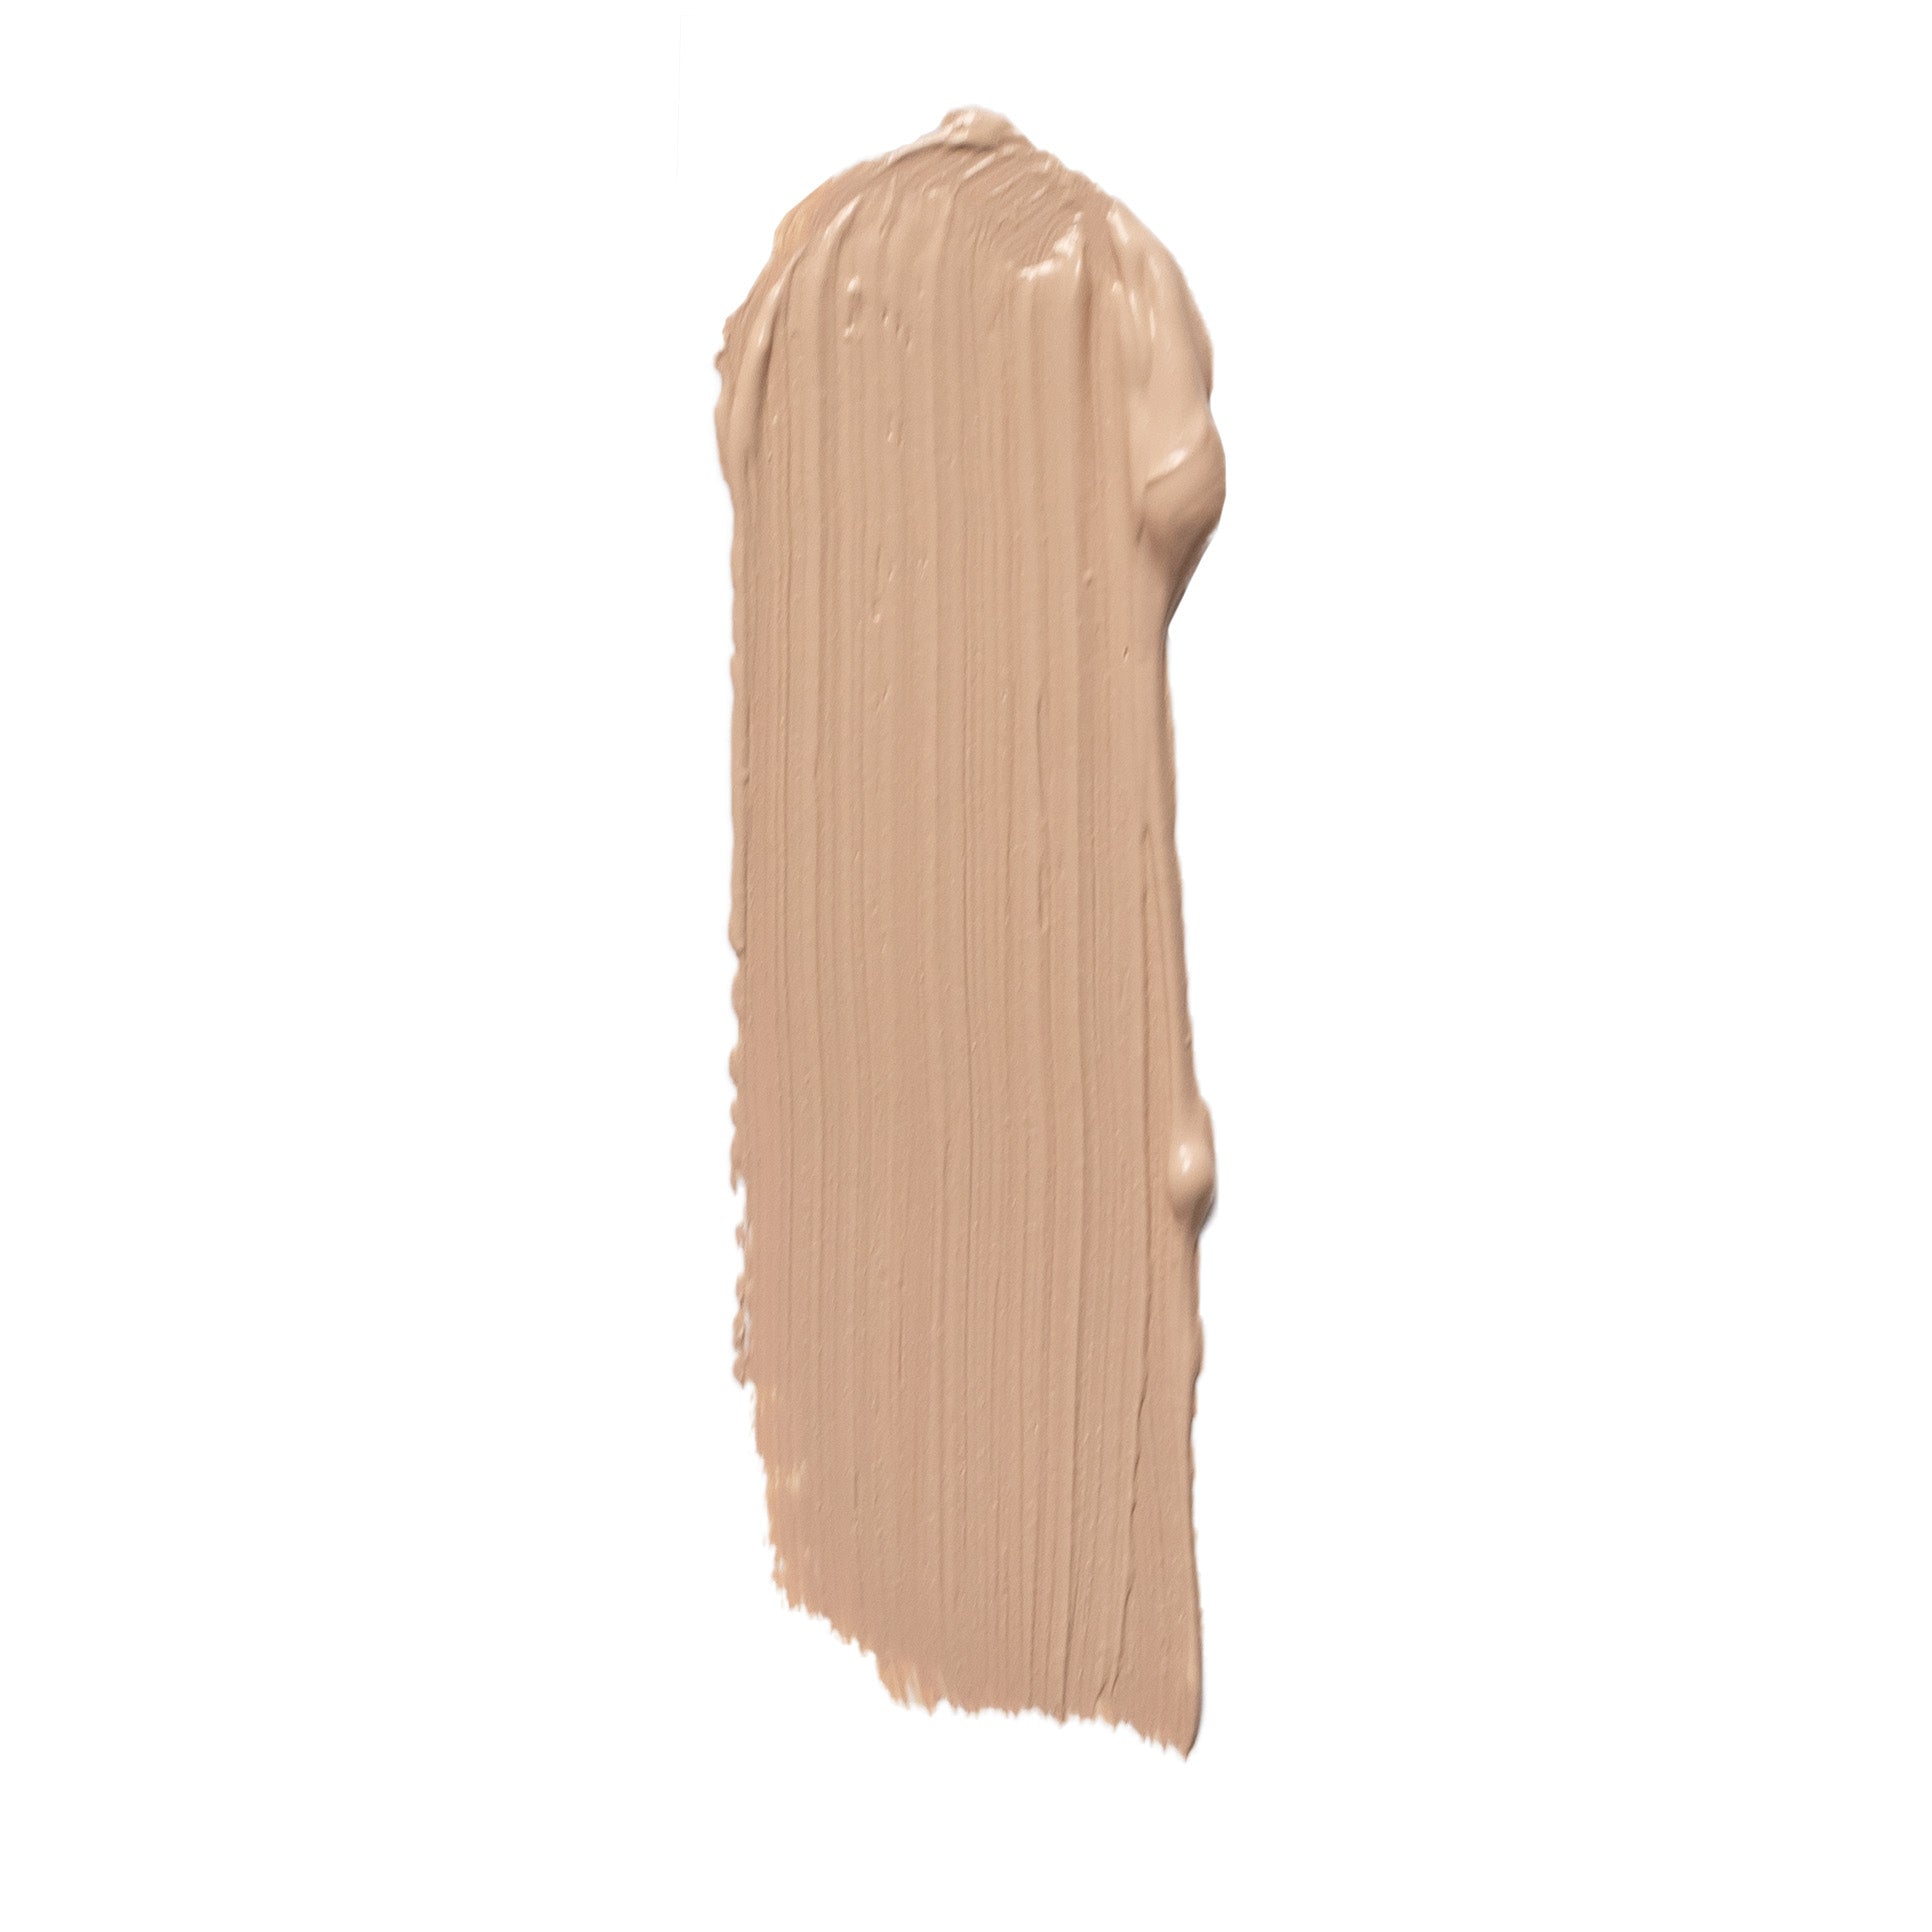 bPerfect CHROMA Cover Matte Foundation, W2 swatch